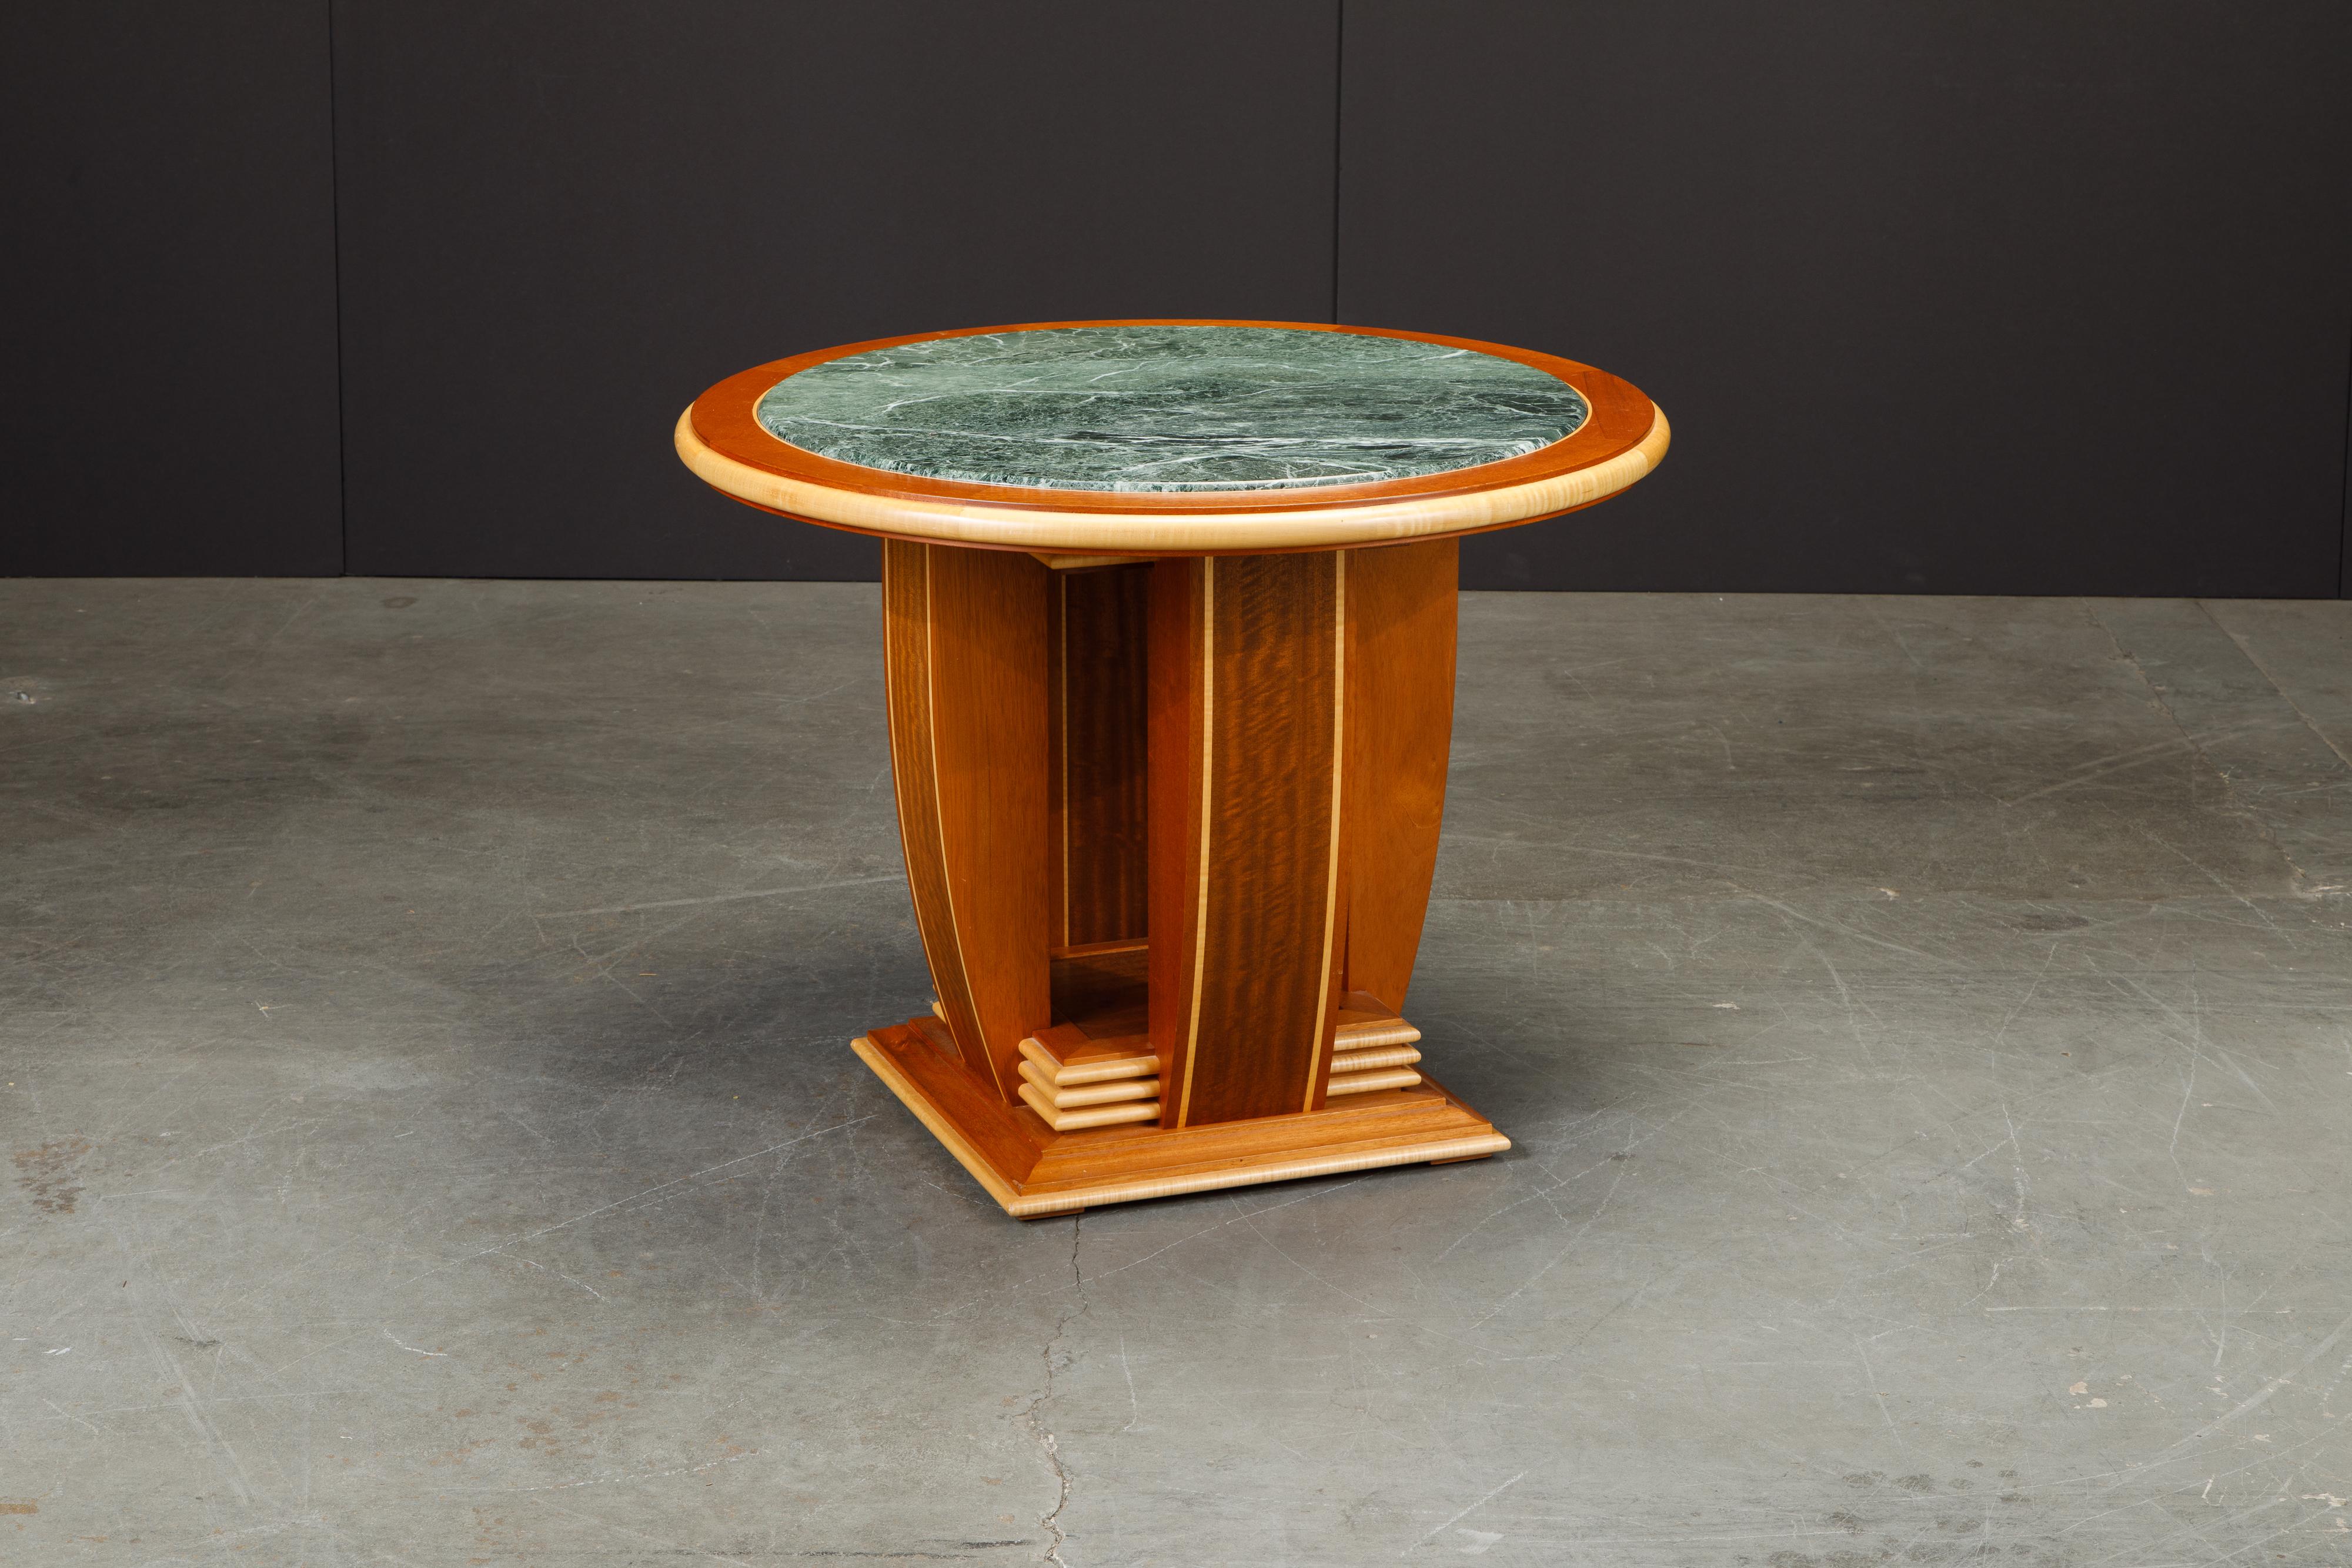 20th Century Mahogany, Maple and Marble Center Table or Tea Table by Ron Puckett